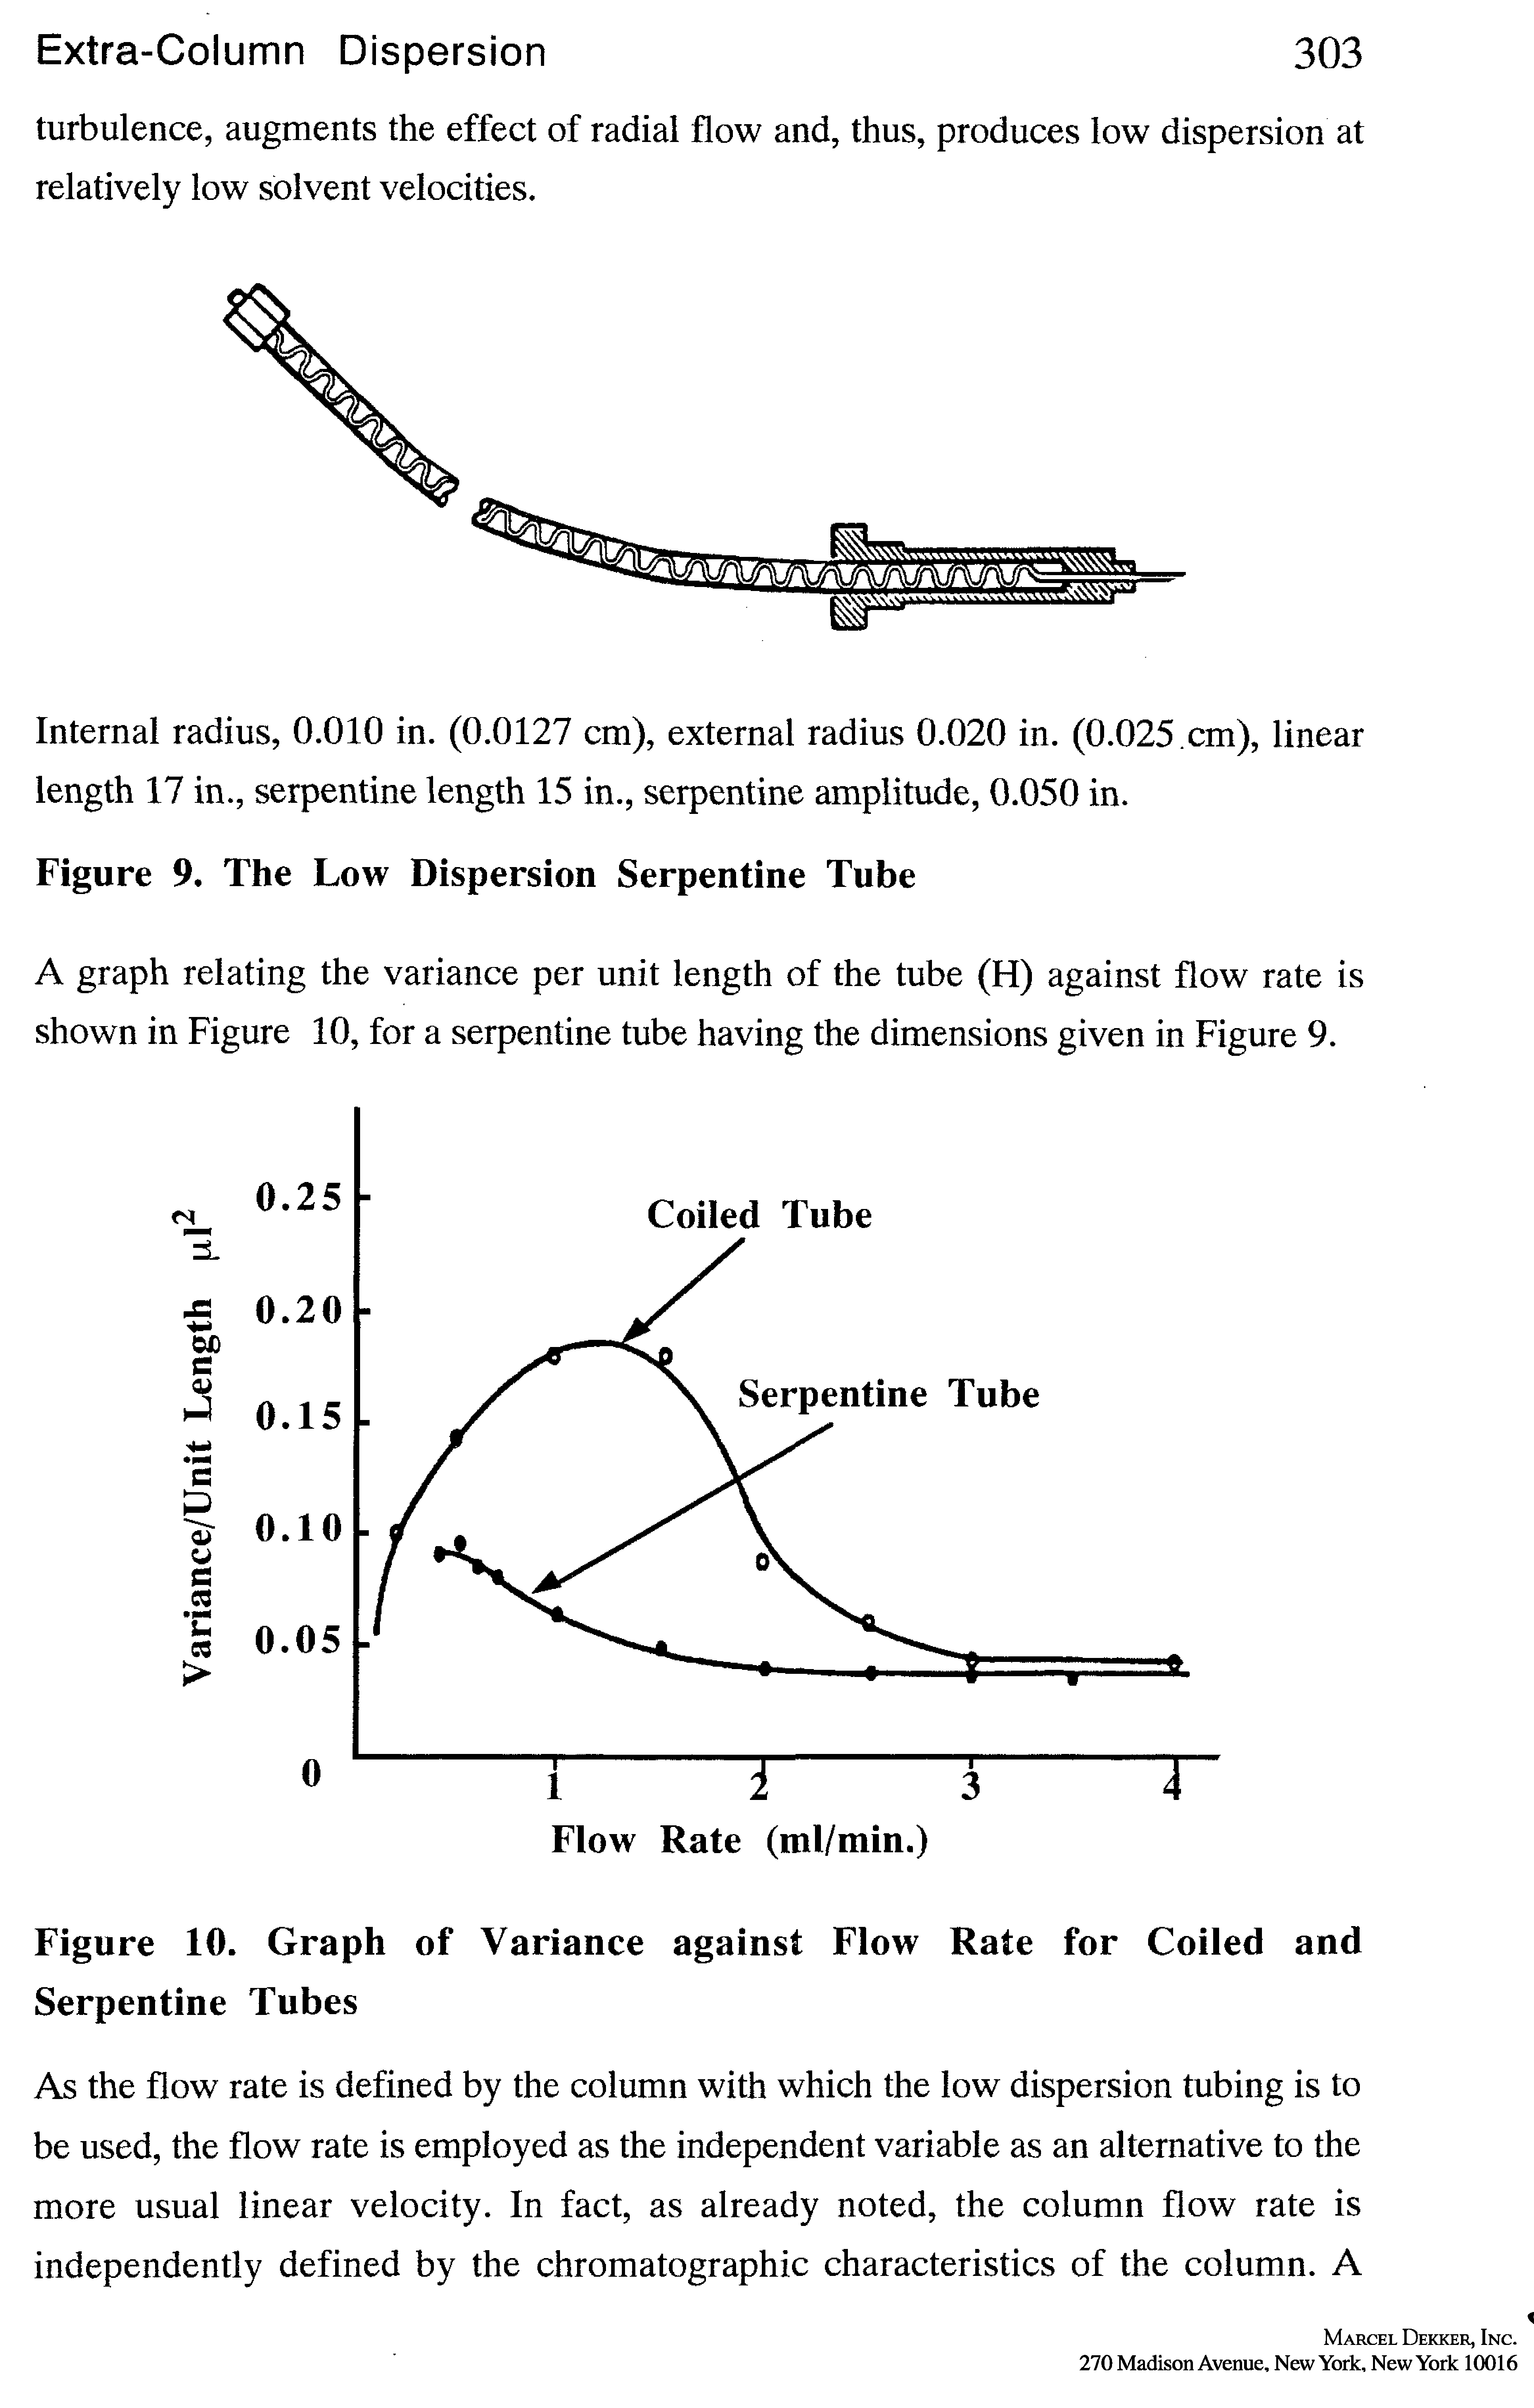 Figure 10. Graph of Variance against Flow Rate for Coiled and Serpentine Tubes...